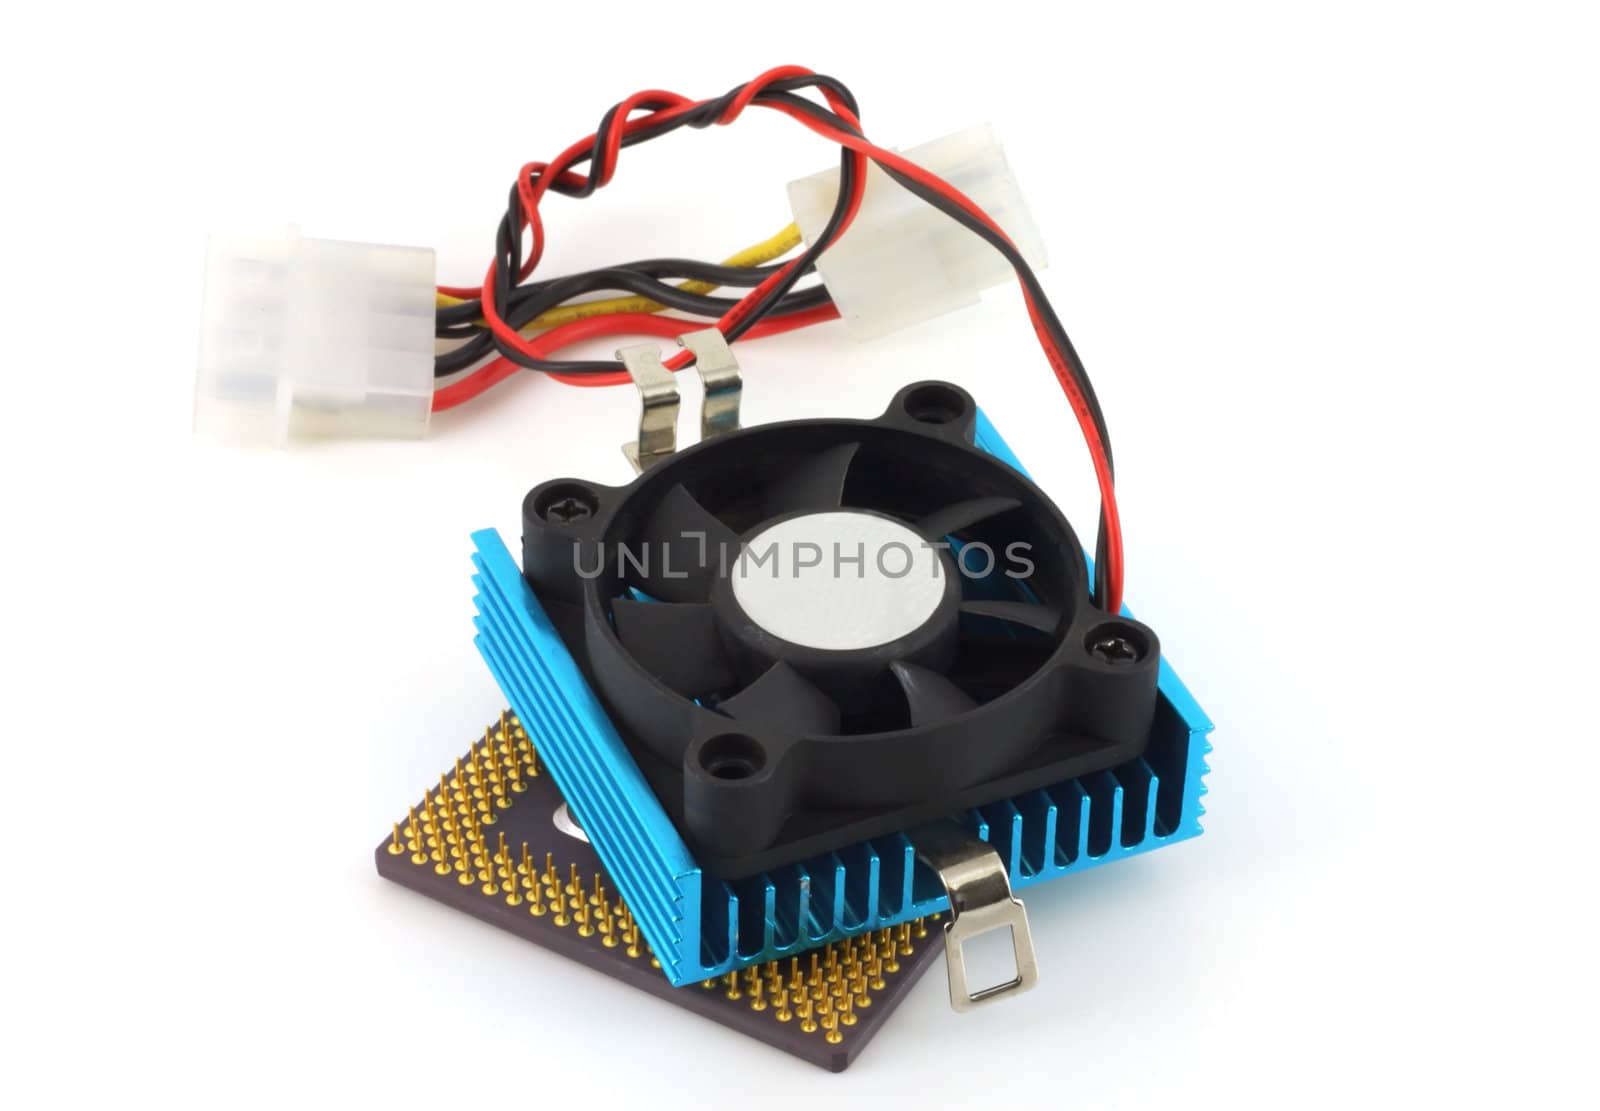 Microprocessor and fan with radiator over white